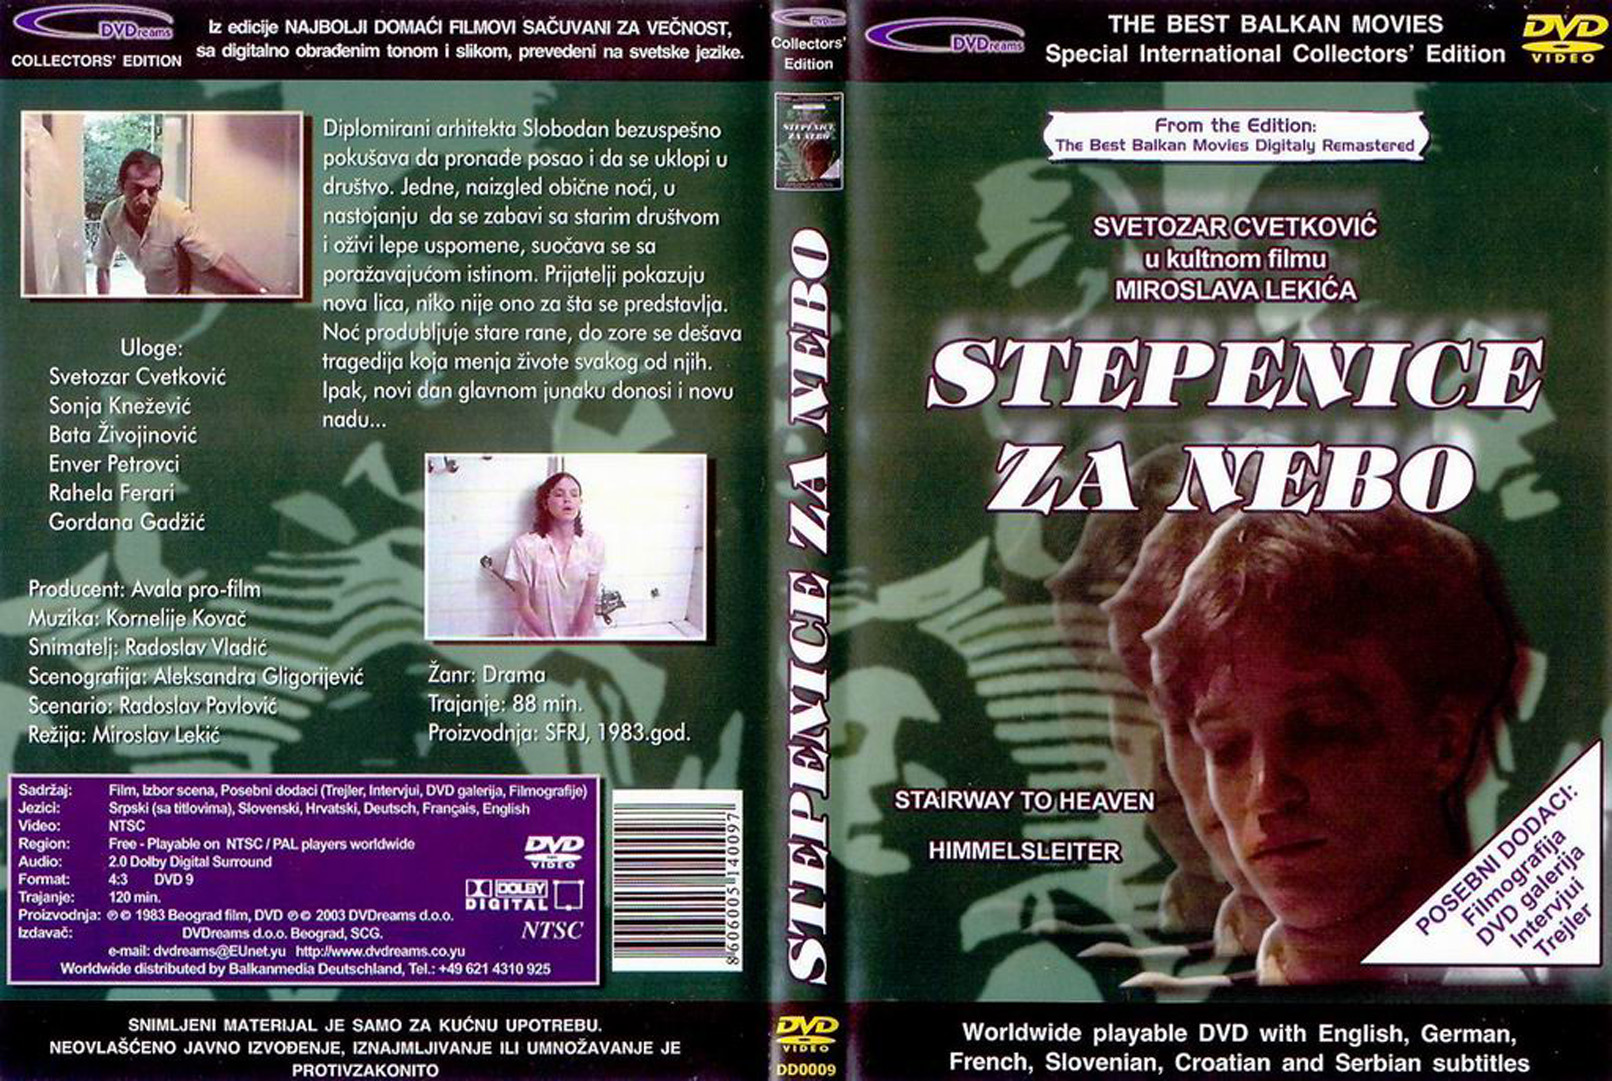 Click to view full size image -  DVD Cover - S - stepenice_za_nebo_dvd - stepenice_za_nebo_dvd.jpg